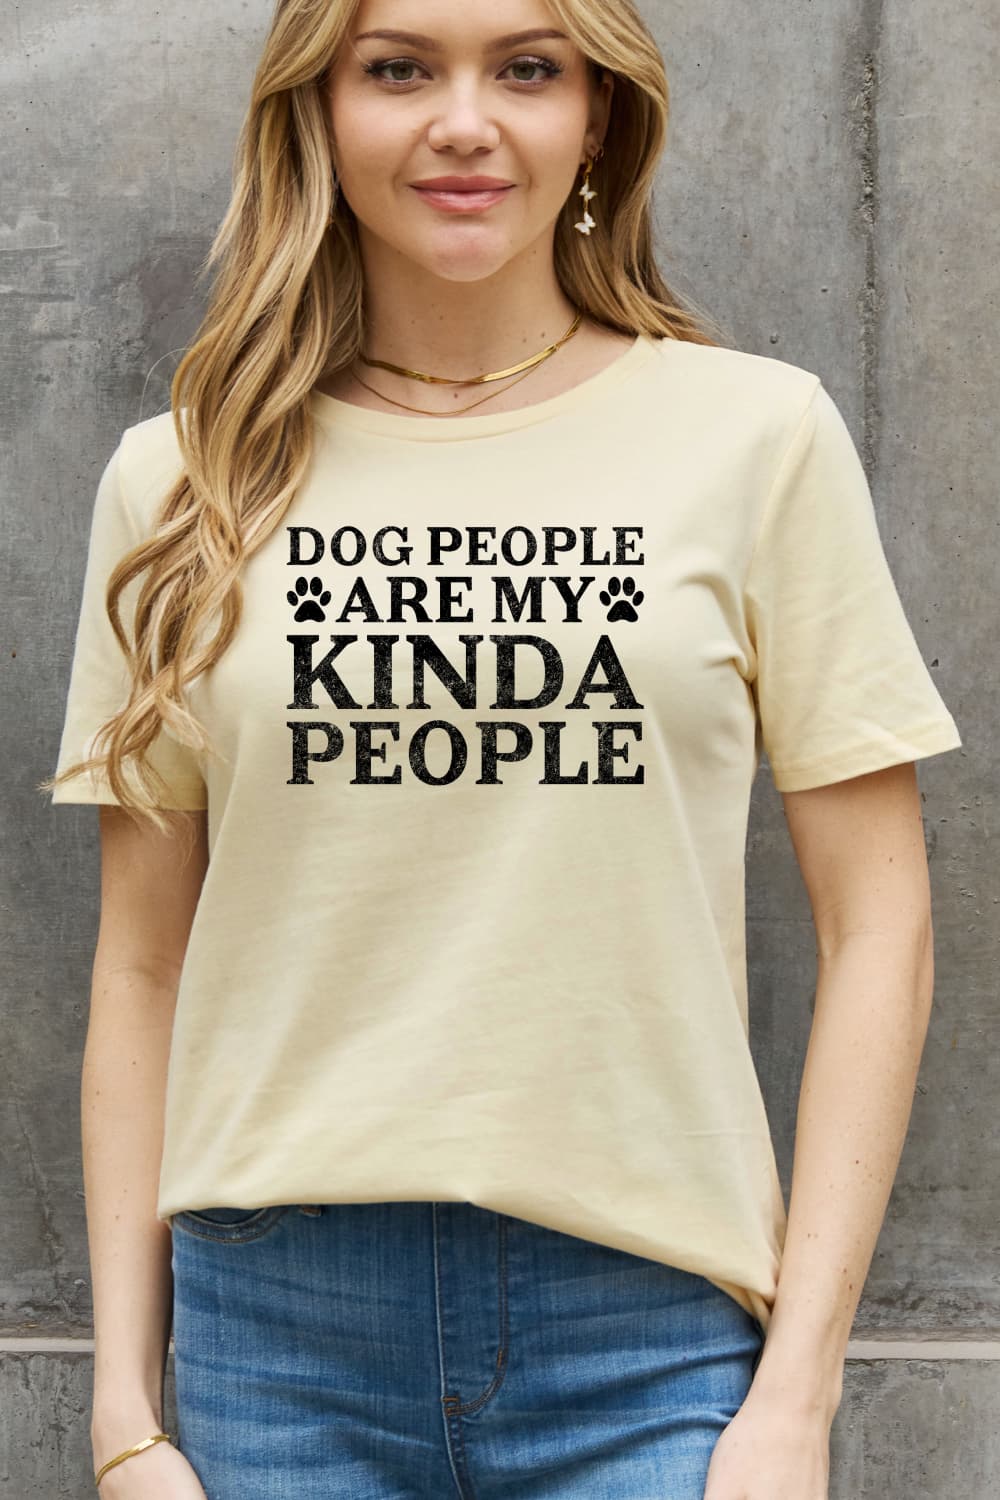 Simply Love Full Size DOG PEOPLE ARE MY KINDA PEOPLE Graphic Cotton Tee BLUE ZONE PLANET